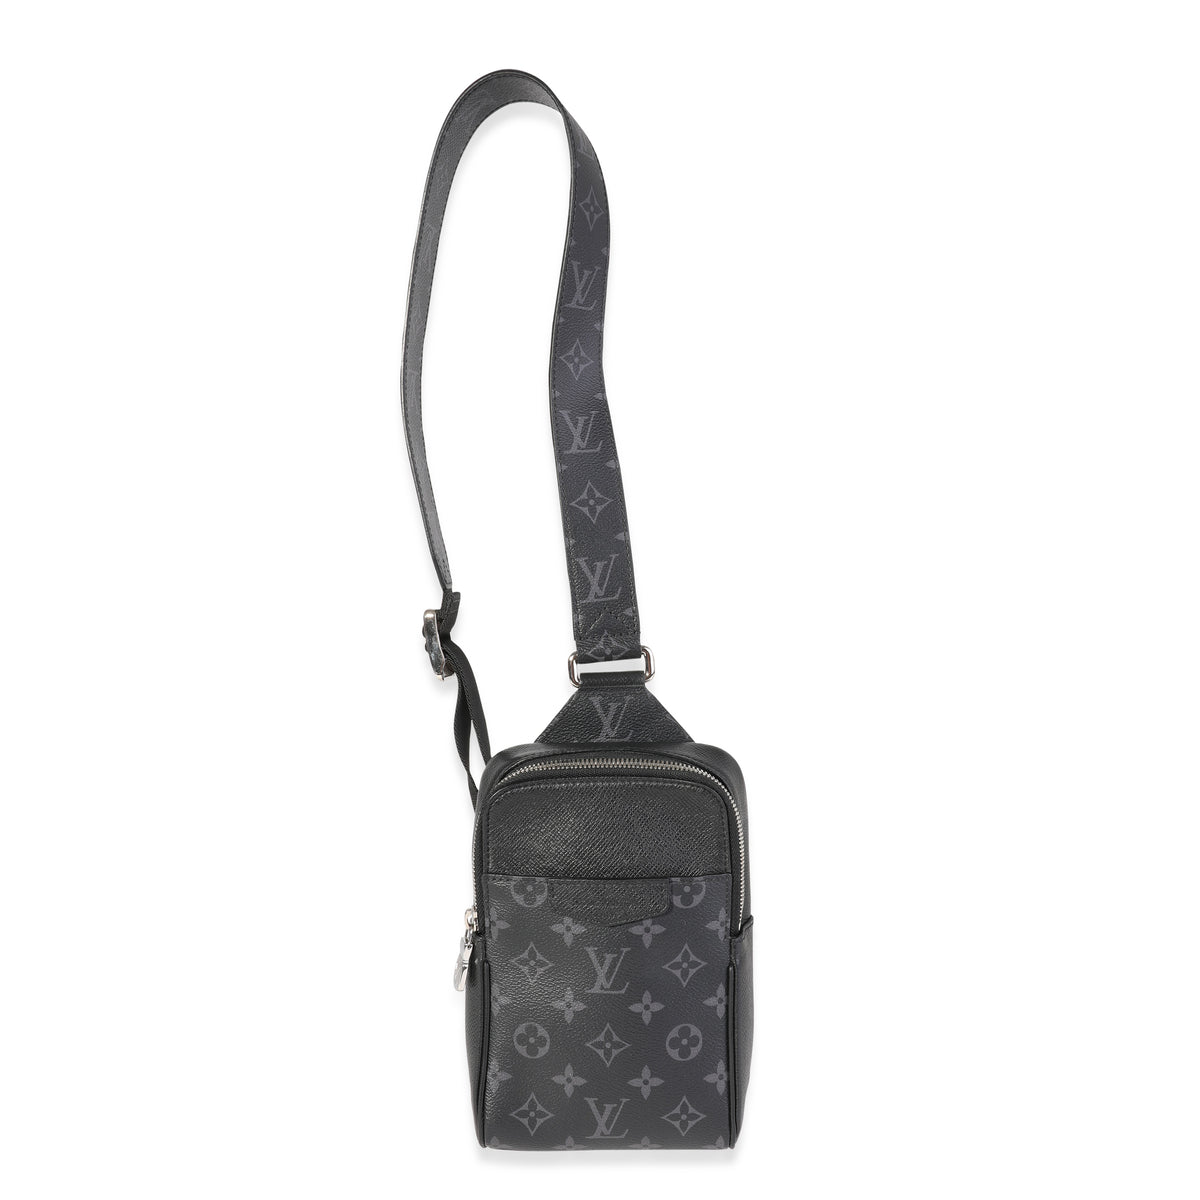 Buy Pre-Owned LOUIS VUITTON Outdoor Slingbag Taigarama